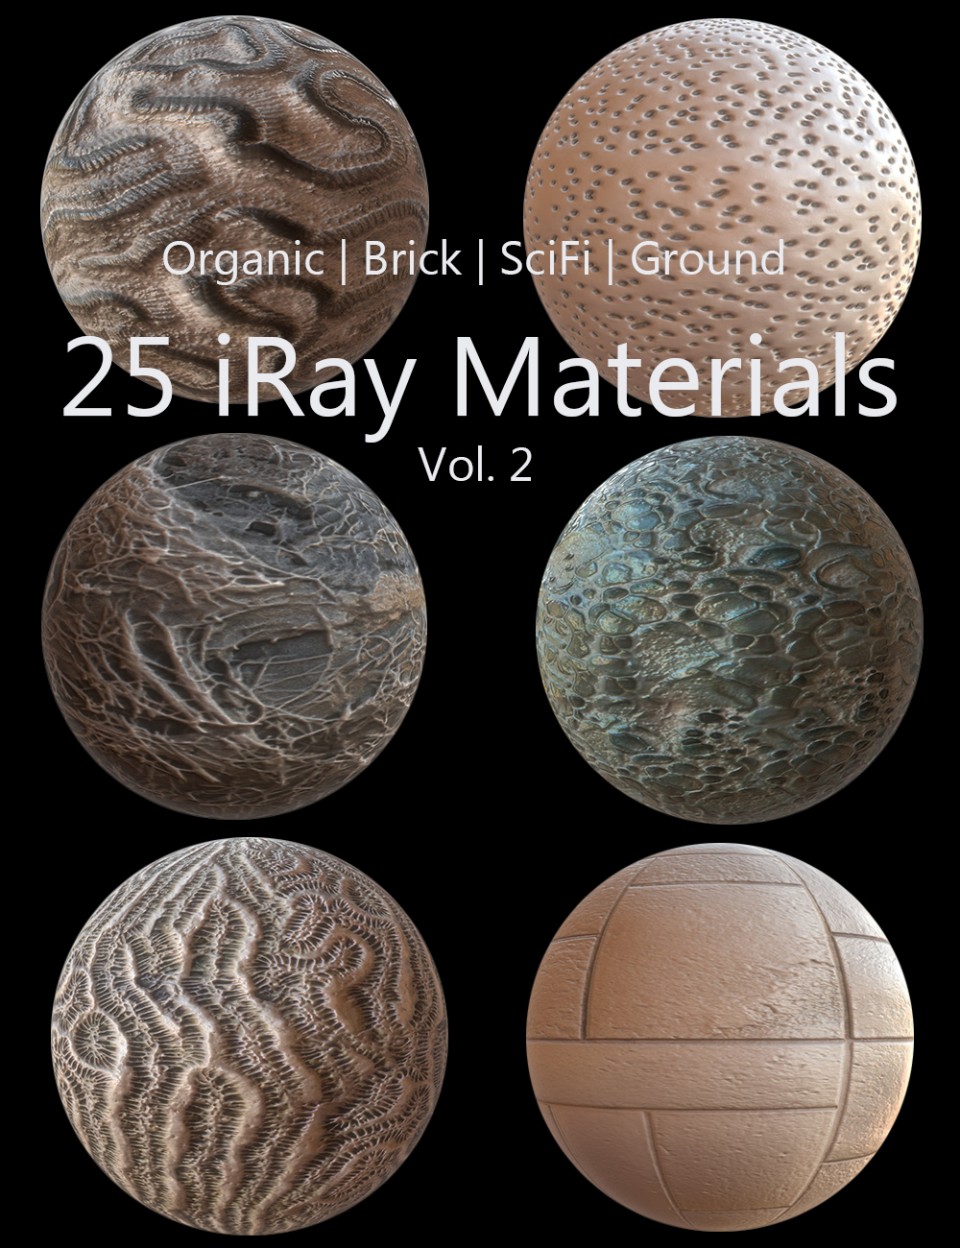 Iray Materials Collection Vol 2